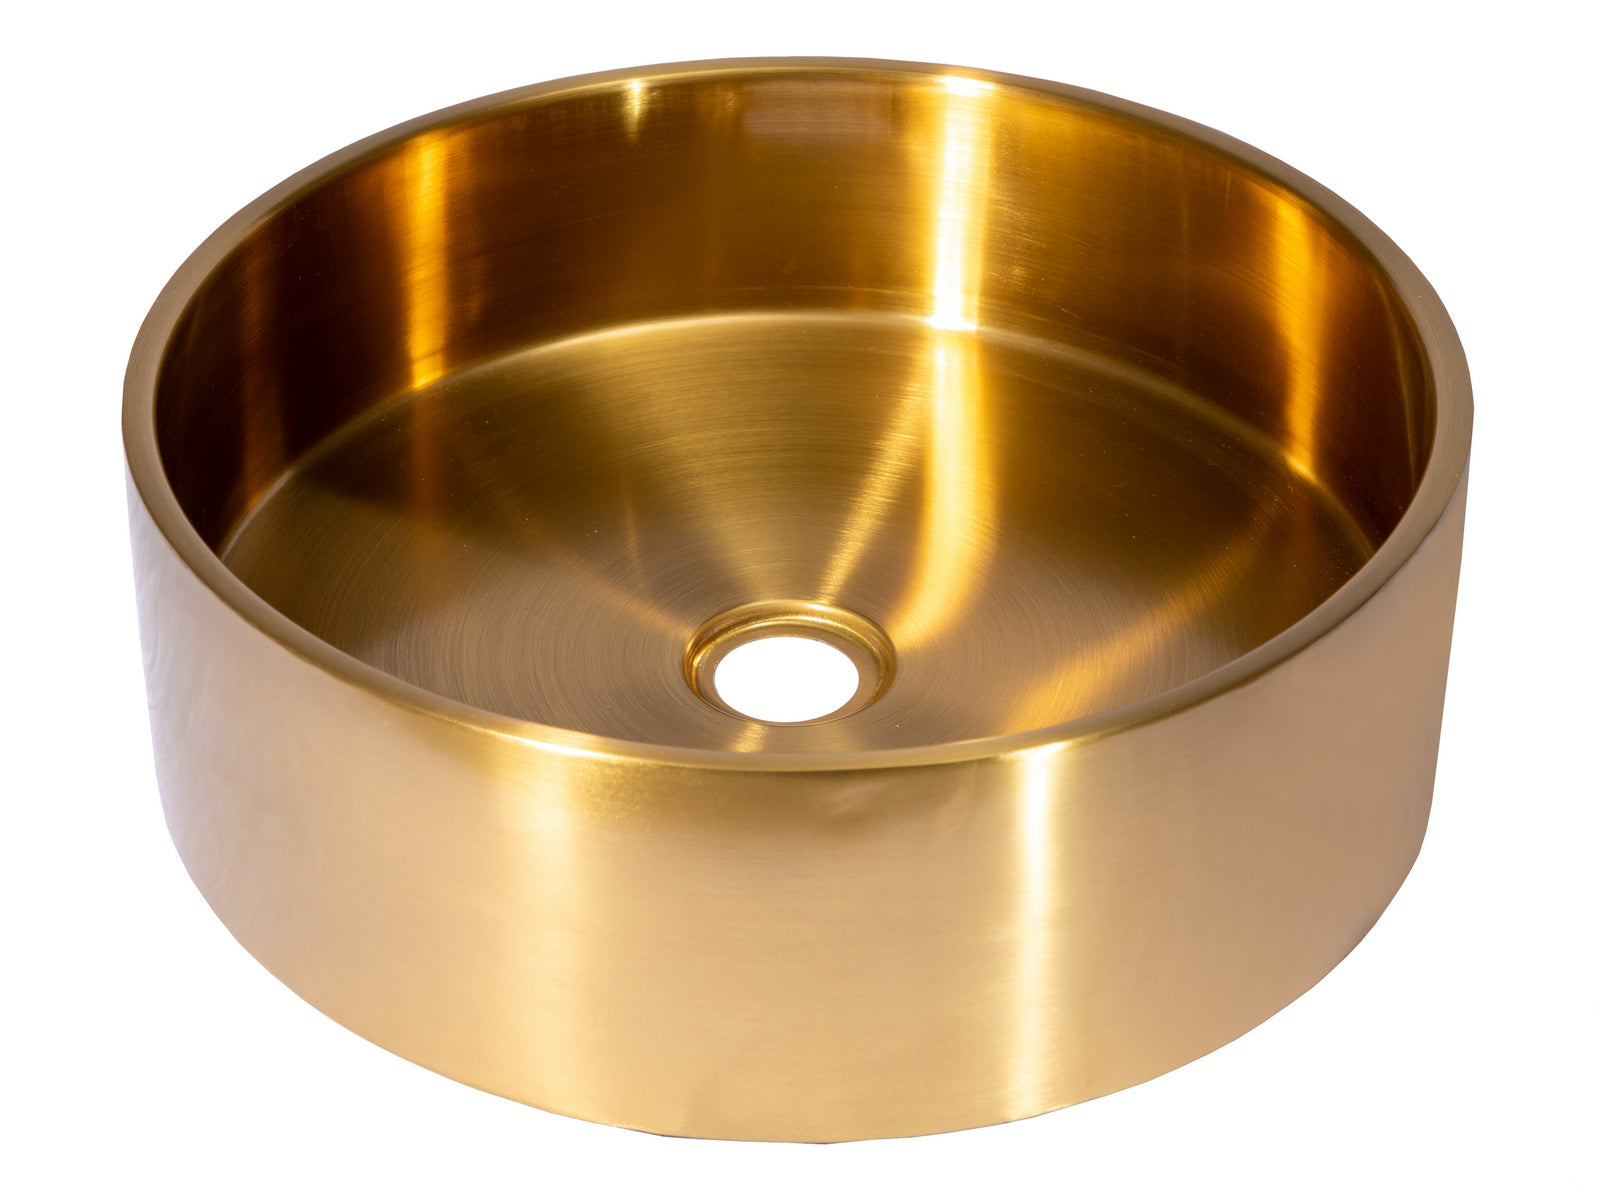 15 3/4" Round Thick Rim Stainless Steel Bathroom Vessel Sink with Drain in Gold